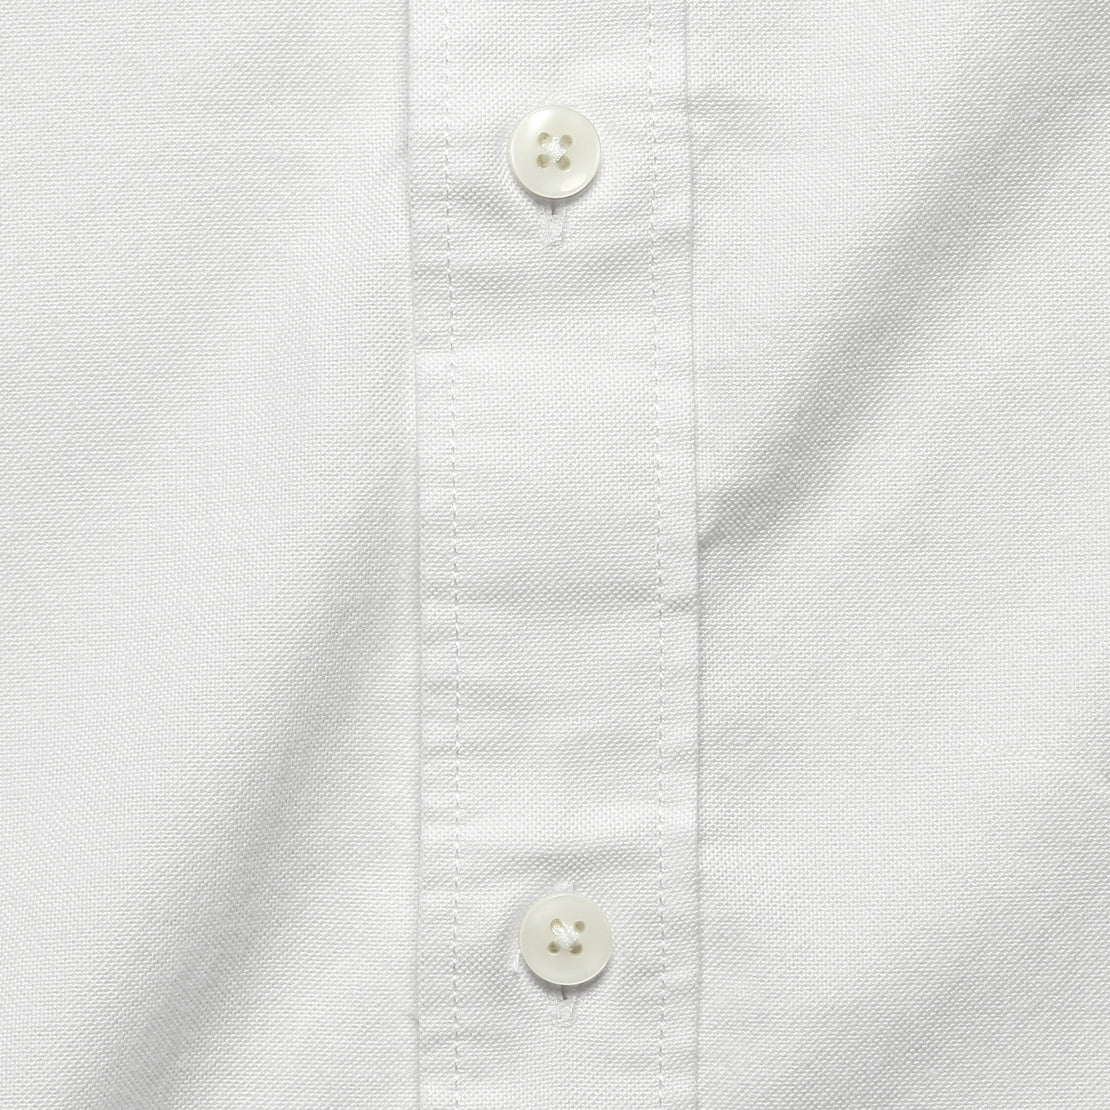 Short Sleeve Supima Oxford Shirt - Pure White - Faherty - STAG Provisions - Tops - S/S Woven - Solid